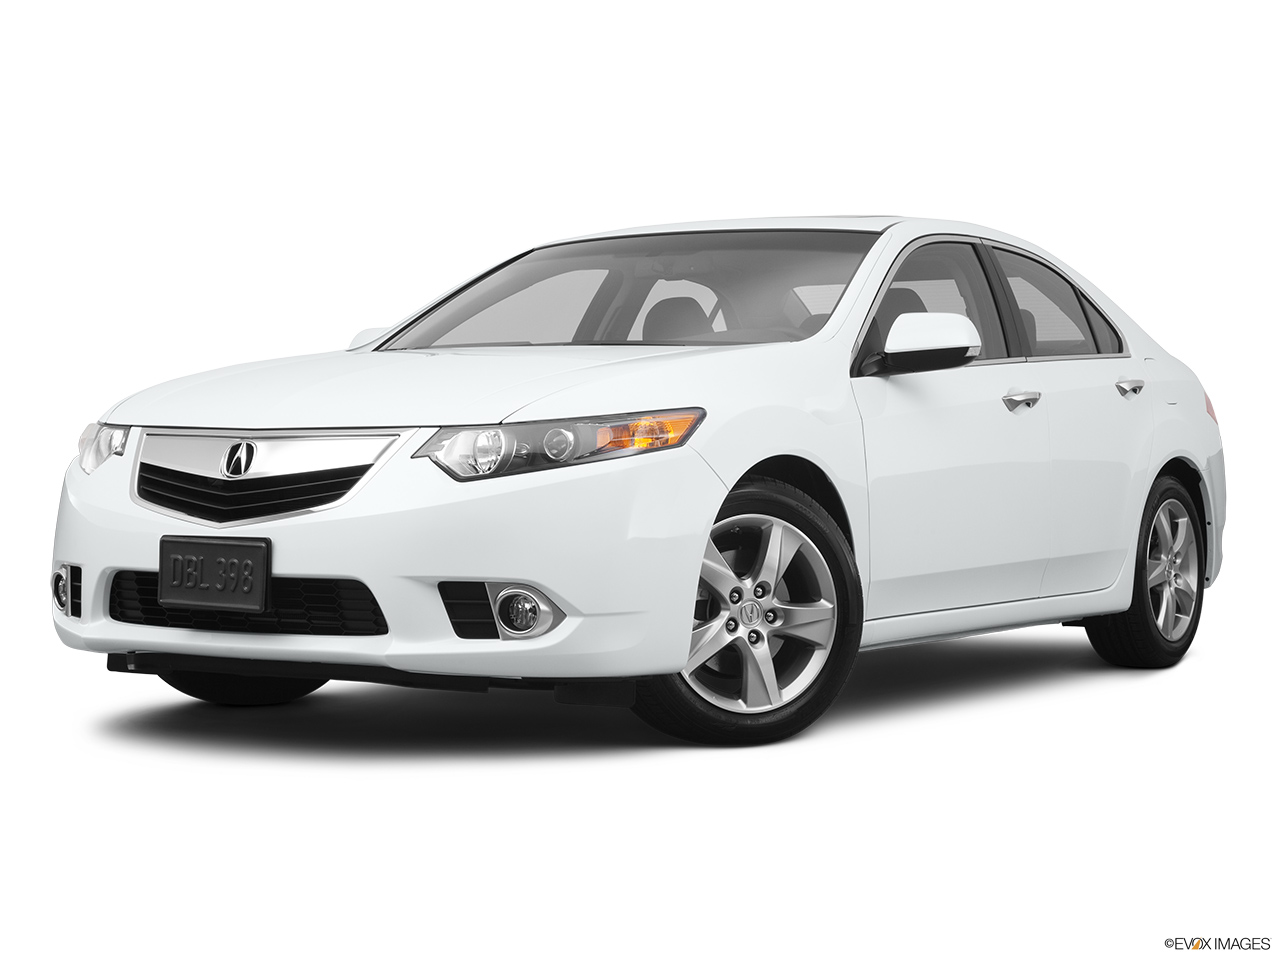 2011 Acura TSX TSX 5-speed Automatic Front angle medium view. 